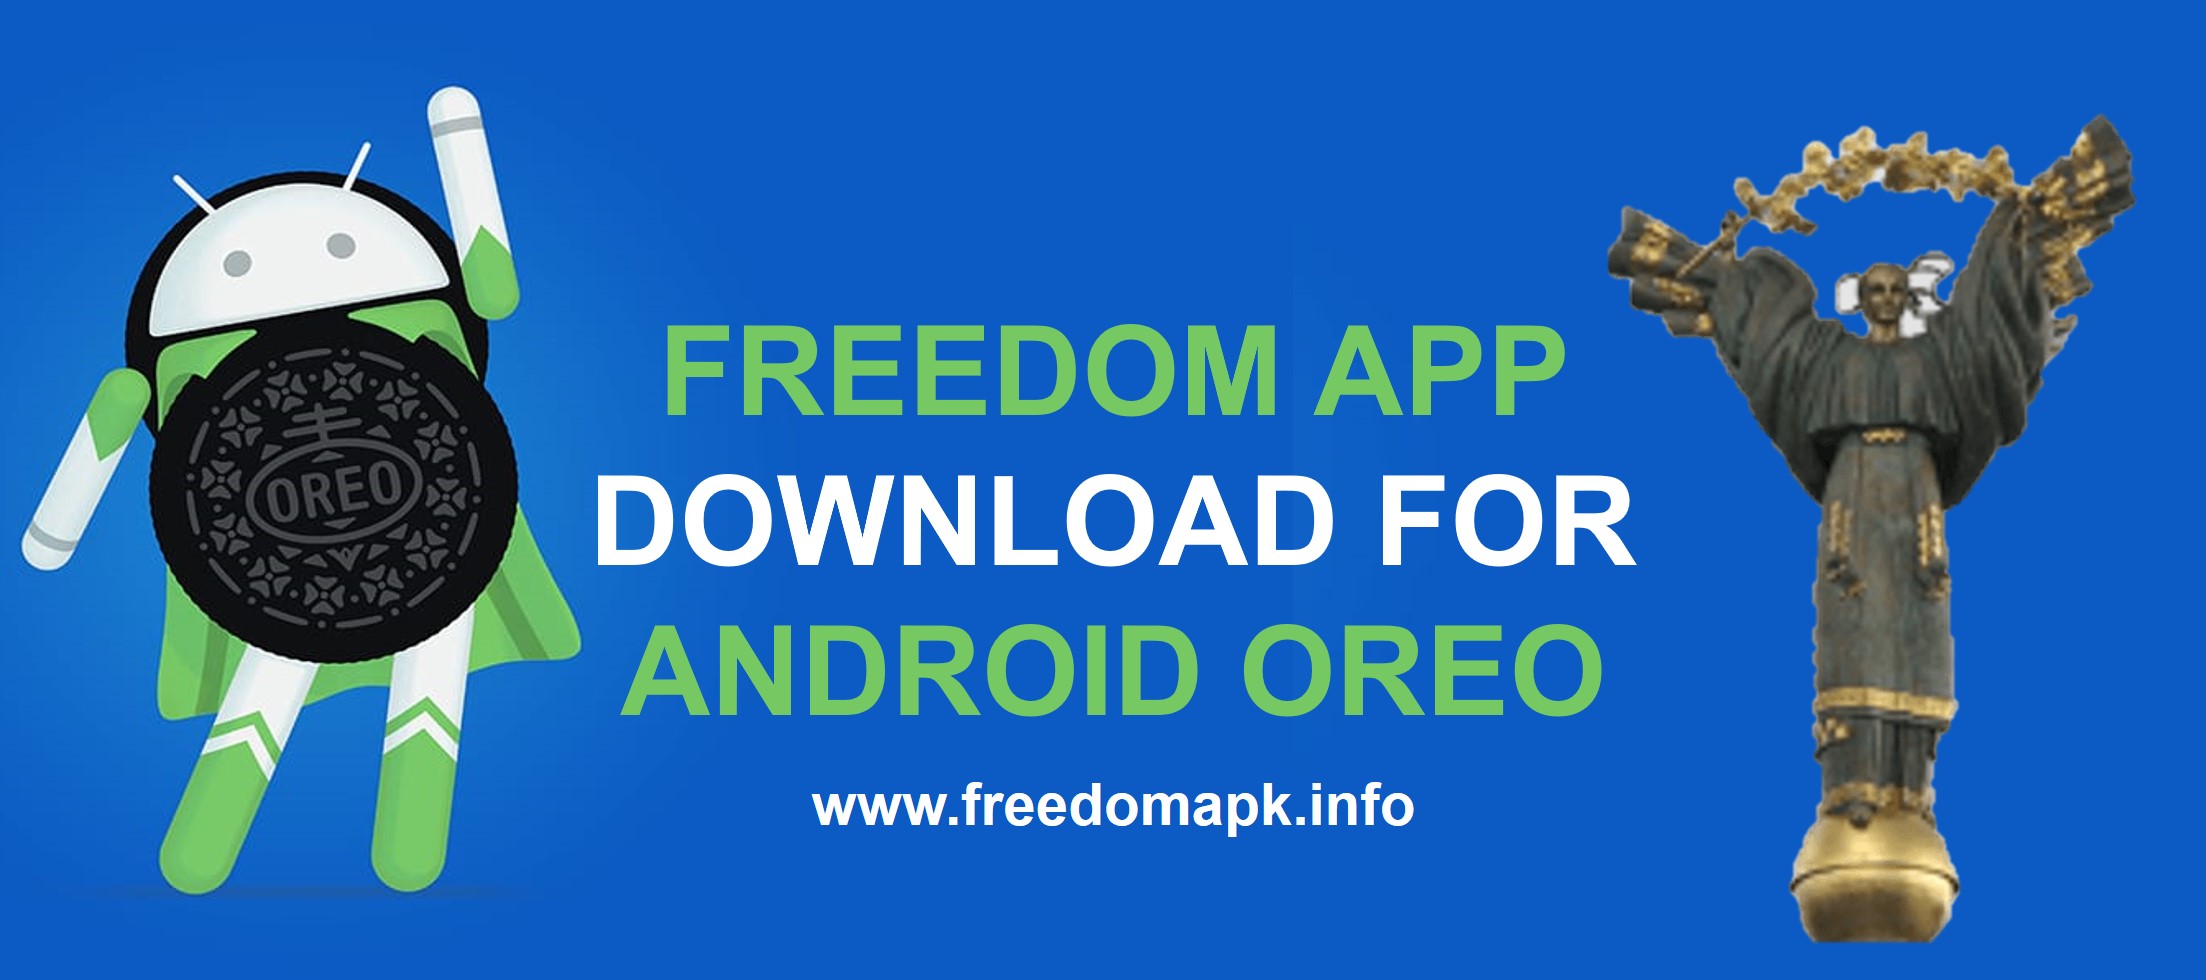 freedom for apk v1.5.9 download officially